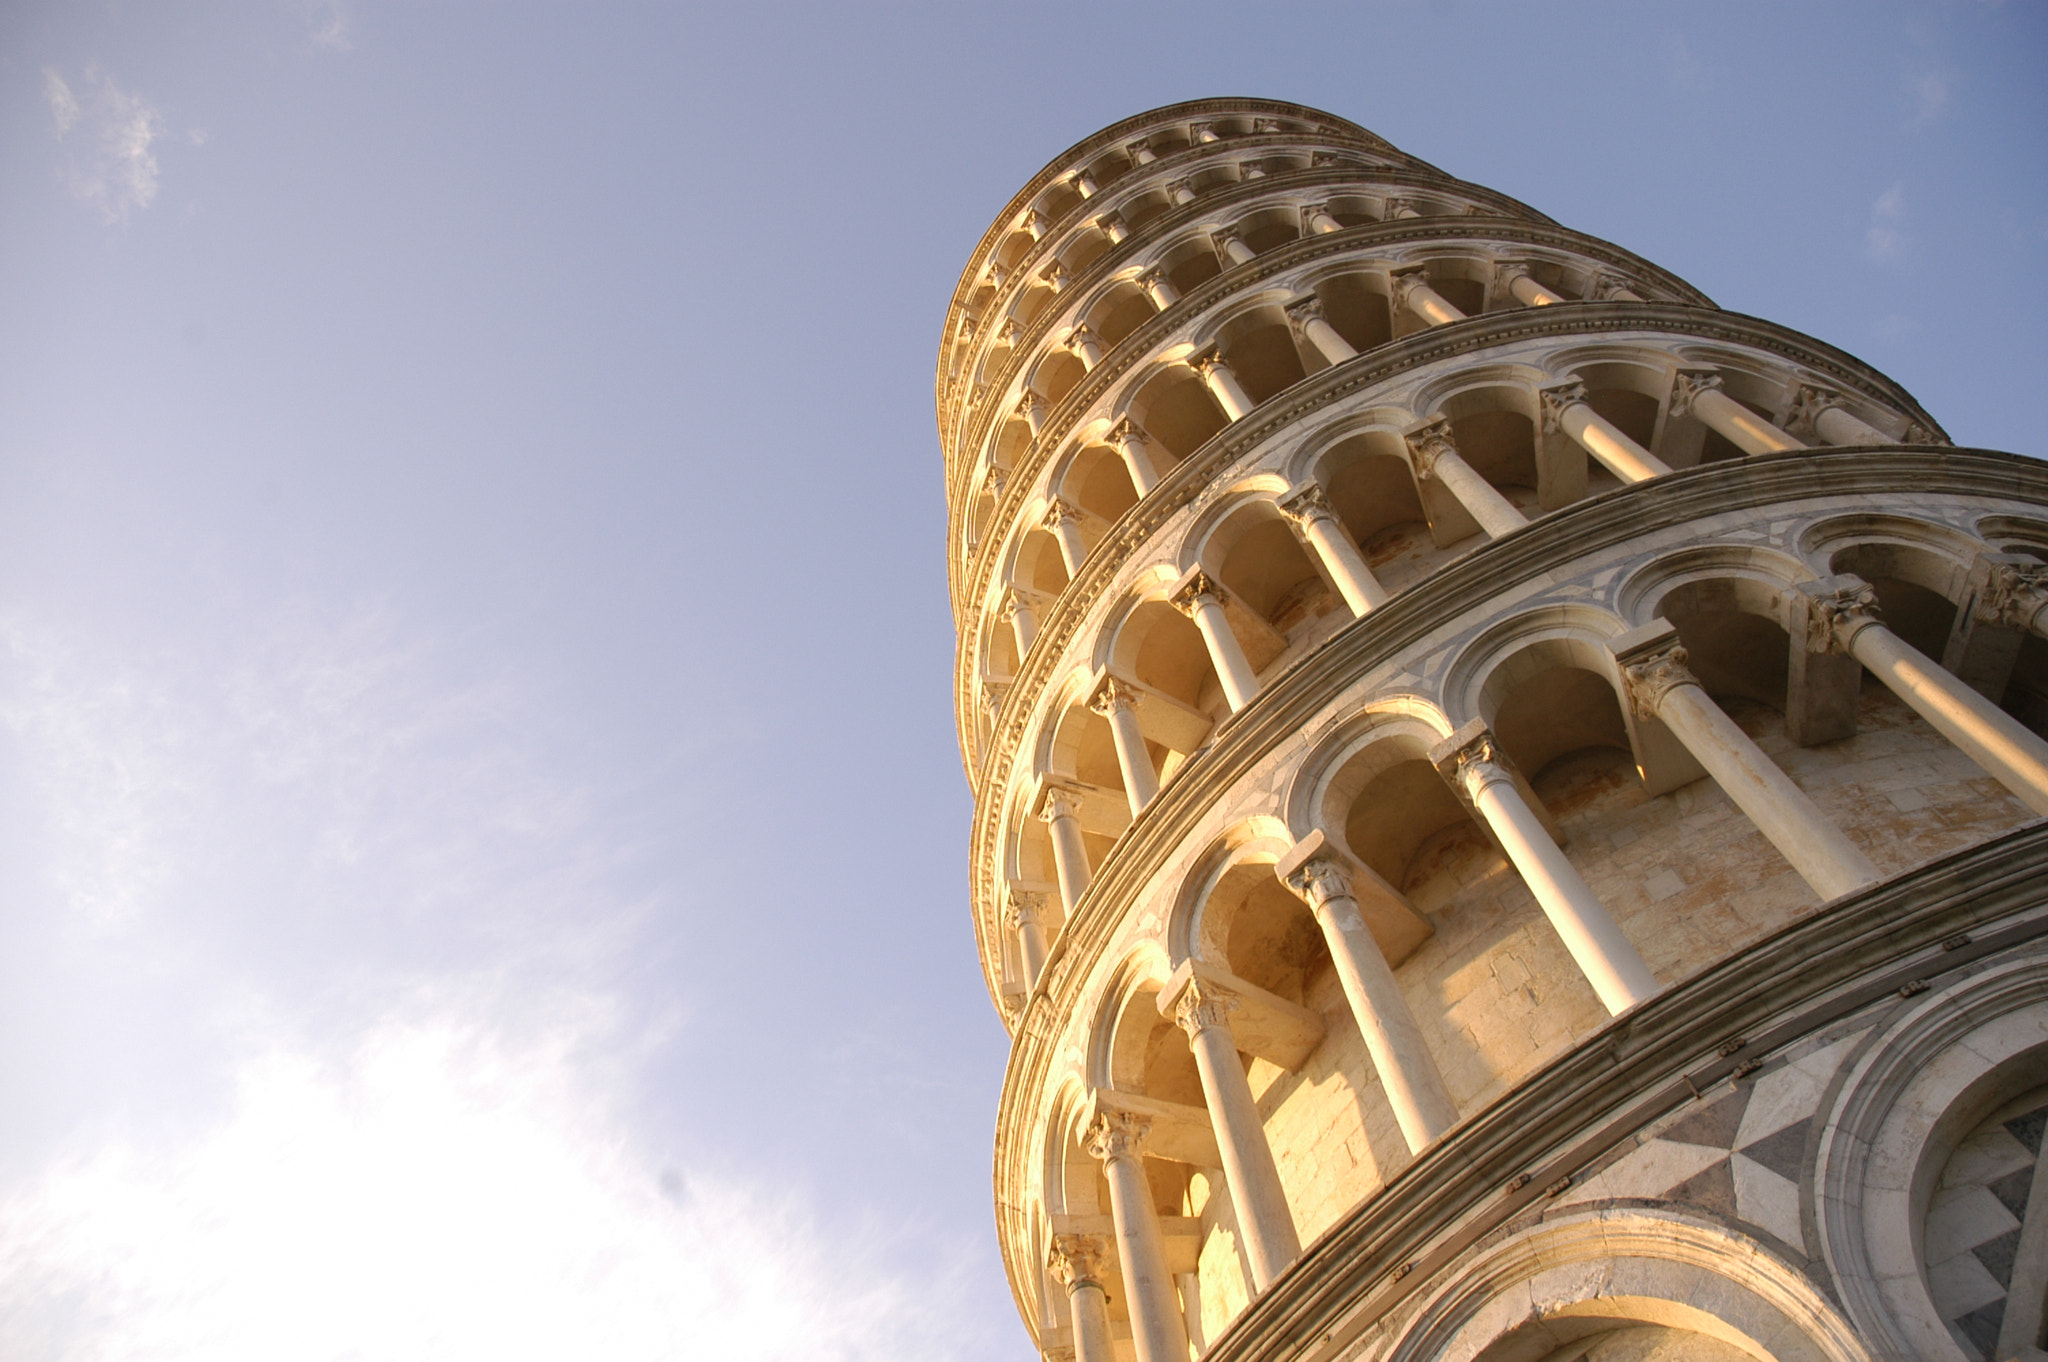 Nikon D100 sample photo. Leaning tower of pisa photography